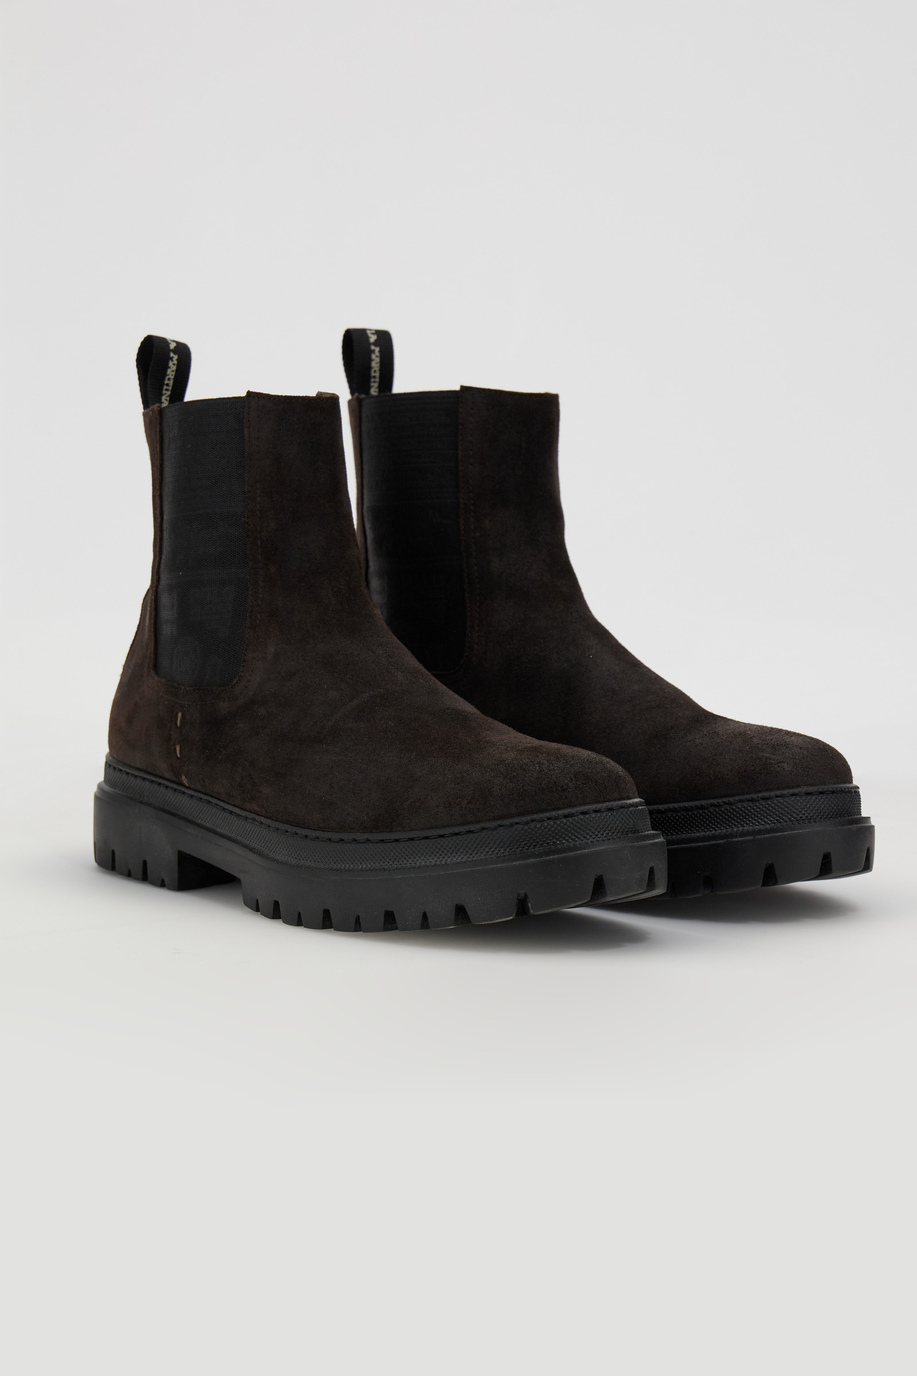 Combat boot in mixed leather - Winter looks for him | La Martina - Official Online Shop